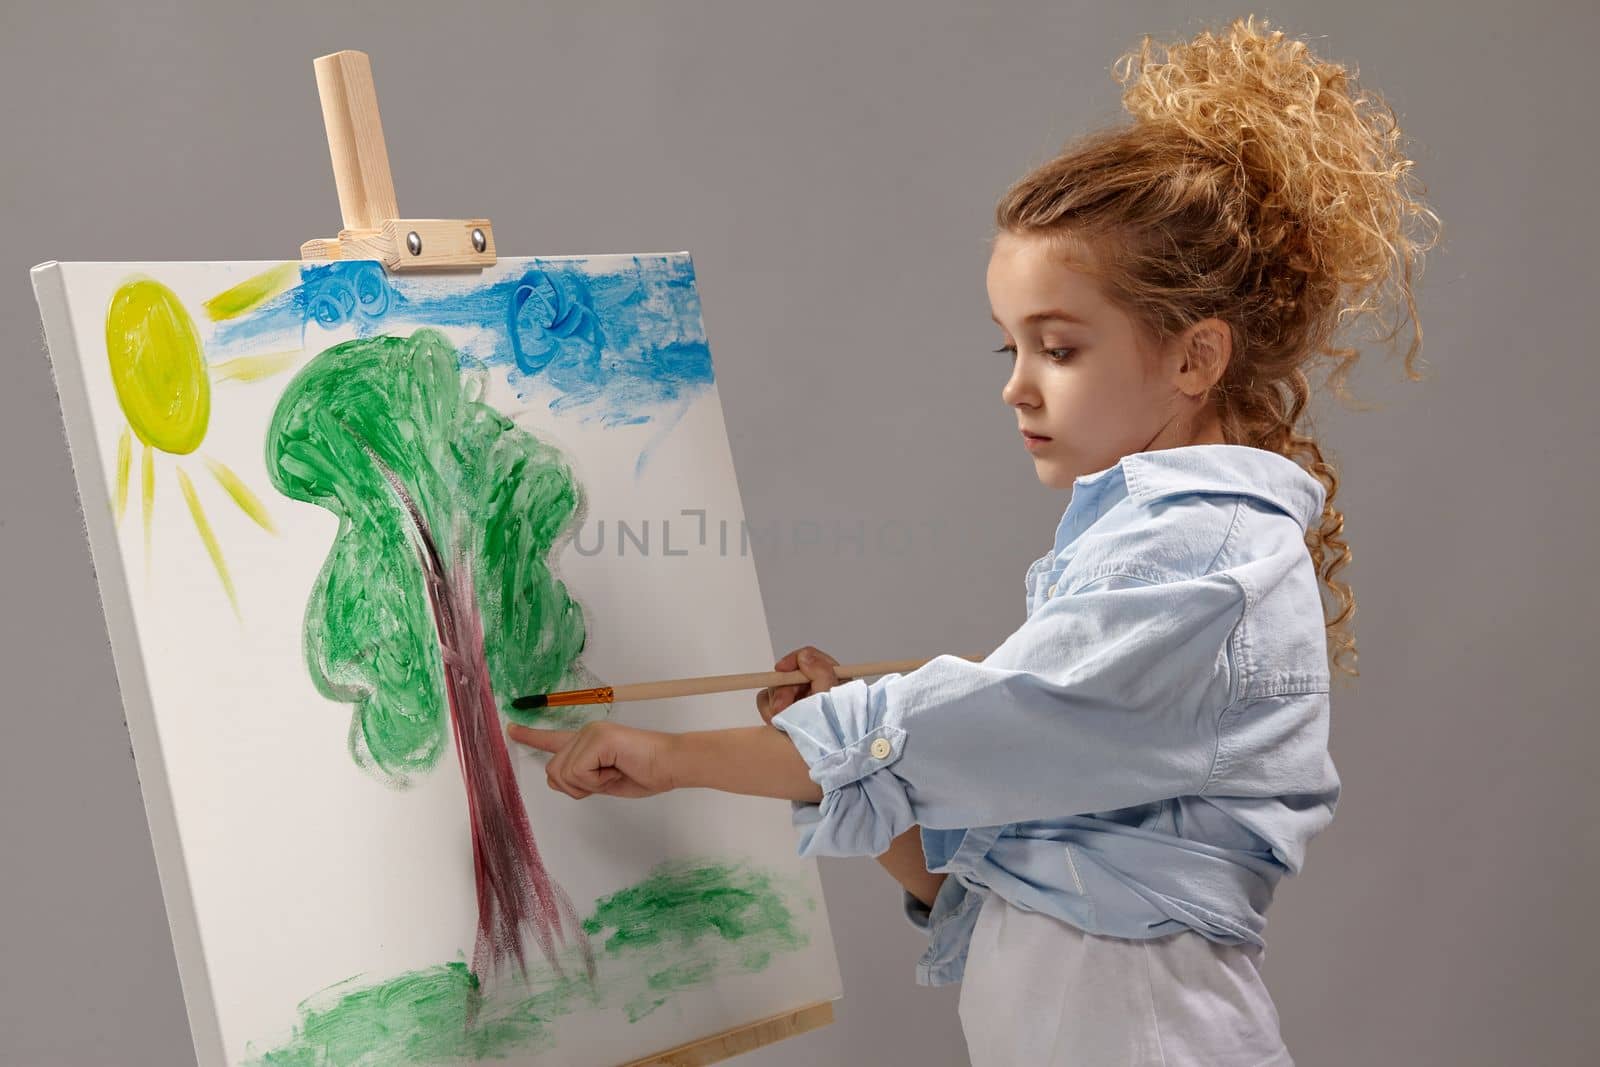 Little school girl whith a curly blond hair, wearing in a blue shirt and white t-shirt is painting with a watercolor brush on an easel, standing on a gray background.